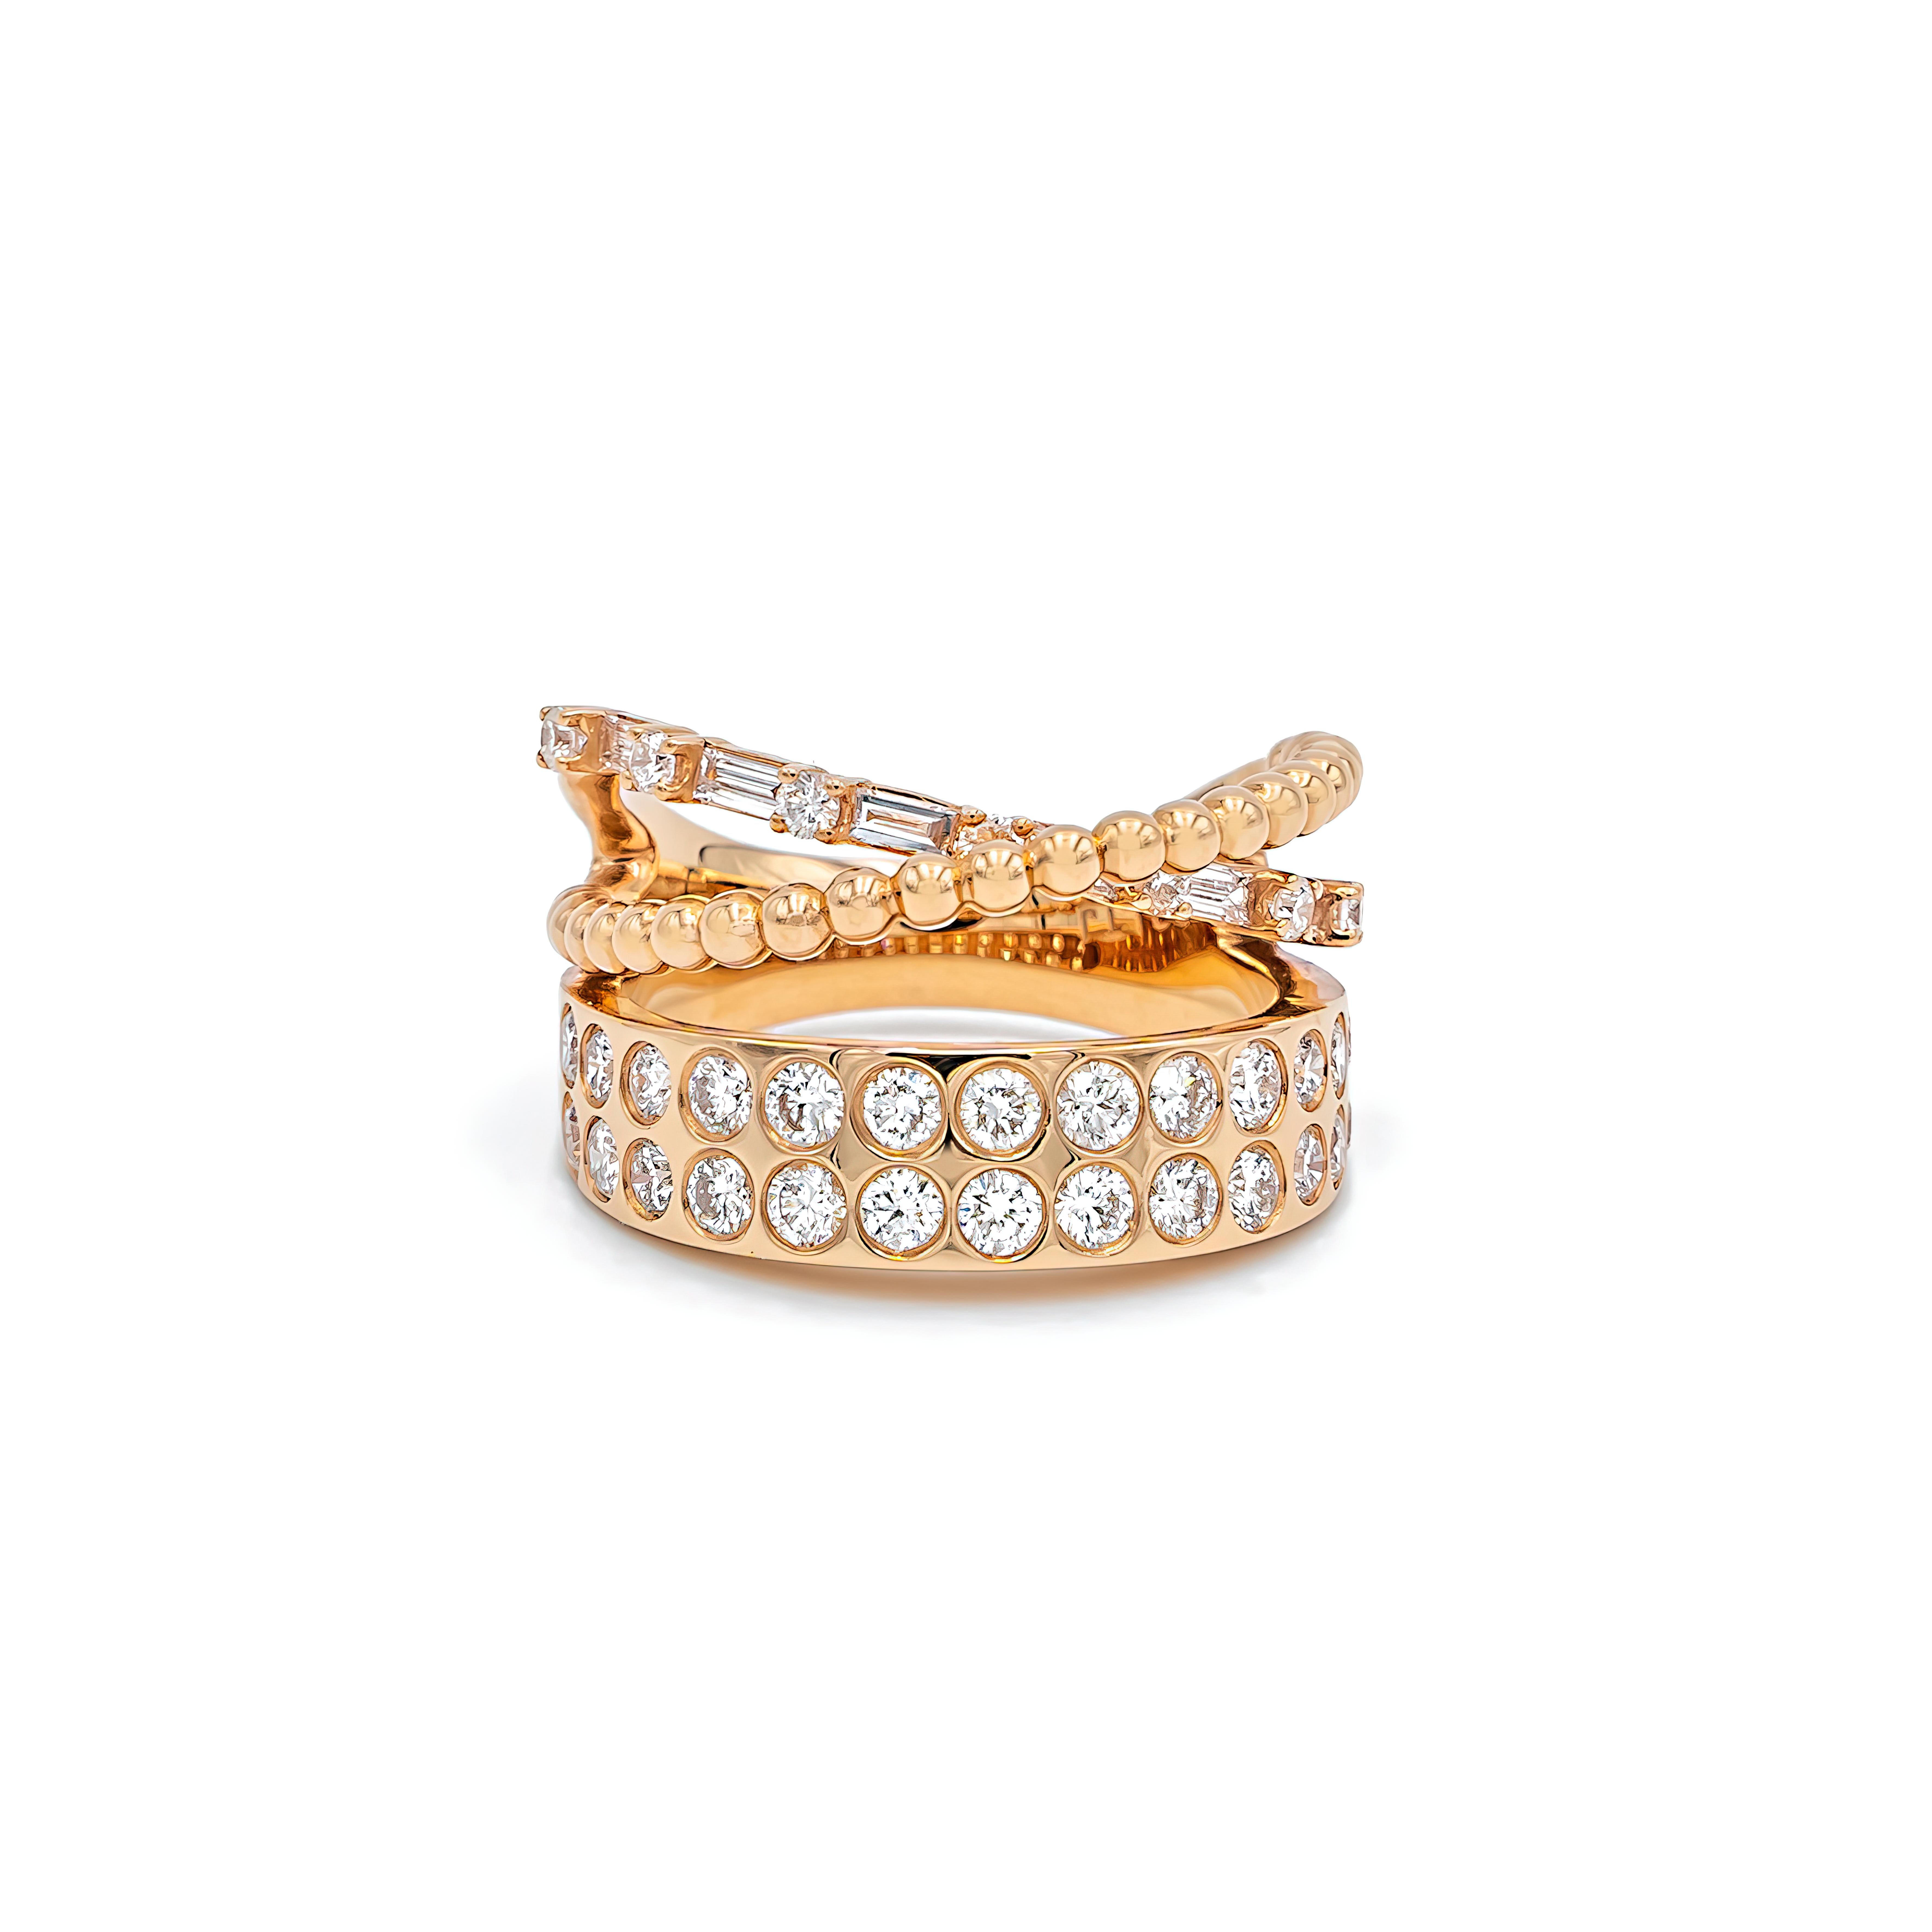 Total Ring Carat Weight: 1.39cts
Diamond Clarity: VS1
Diamond Color: G
Gold Purity: 18k
Gold Color: Rose
Gold Weight: 8.74g
Diamond Type: Natural Diamond, Conflict-Free

Total Ring Carat Weight: 1.39cts
Diamond Clarity: VS1
Diamond Color: G
Gold